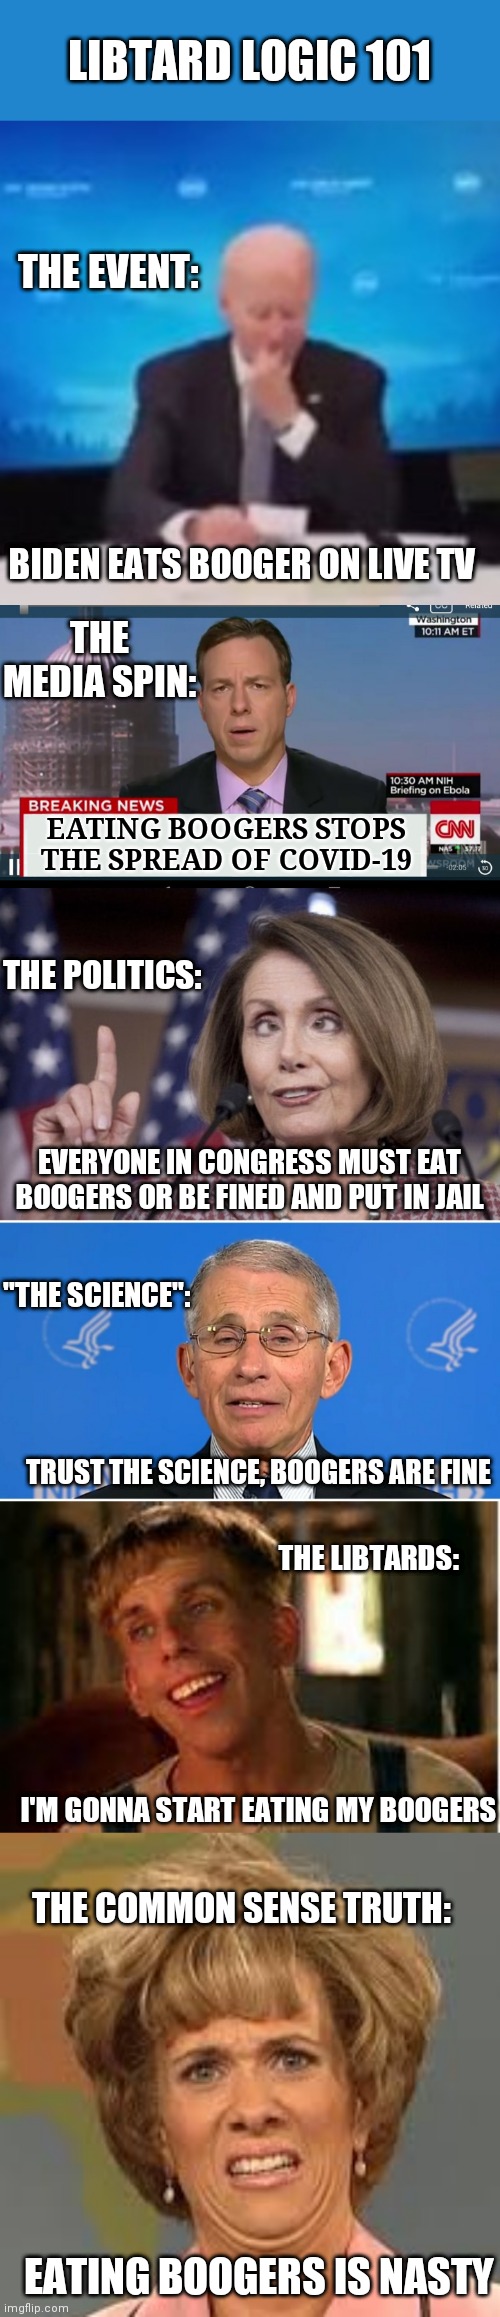 LIBTARD LOGIC 101; THE EVENT:; BIDEN EATS BOOGER ON LIVE TV; THE MEDIA SPIN:; EATING BOOGERS STOPS THE SPREAD OF COVID-19; THE POLITICS:; EVERYONE IN CONGRESS MUST EAT BOOGERS OR BE FINED AND PUT IN JAIL; "THE SCIENCE":; TRUST THE SCIENCE, BOOGERS ARE FINE; THE LIBTARDS:; I'M GONNA START EATING MY BOOGERS; THE COMMON SENSE TRUTH:; EATING BOOGERS IS NASTY | image tagged in cnn breaking news template,nancy pelosi,dr fauci,simple jack,ewww | made w/ Imgflip meme maker